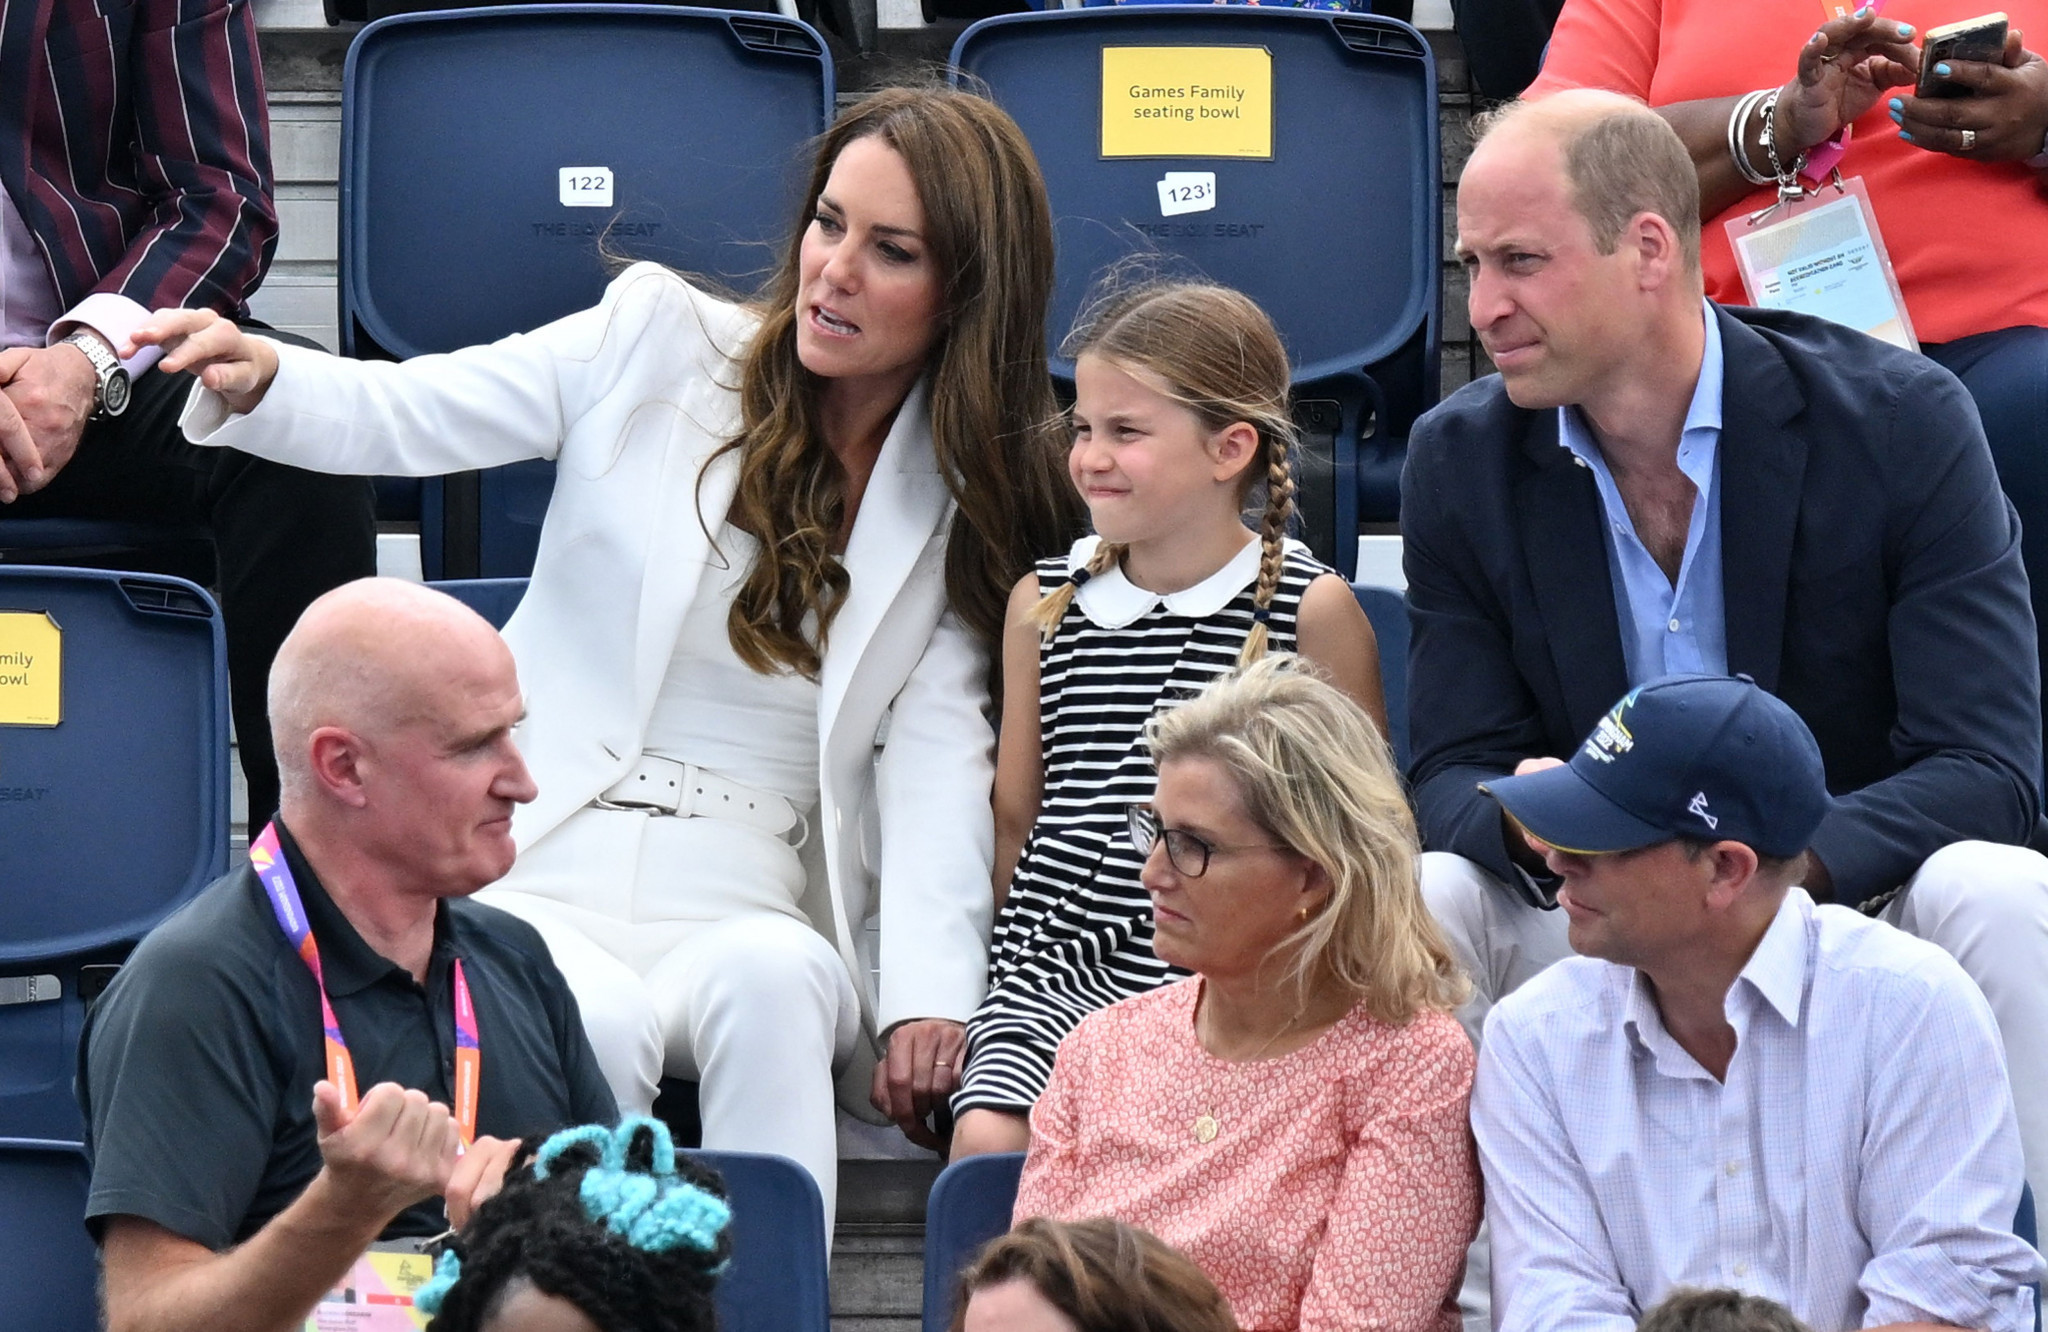 Members of the royal family were spotted at various venues including the Sandwell Aquatics Centre and University of Birmingham Hockey and Squash Centre ©Getty Images